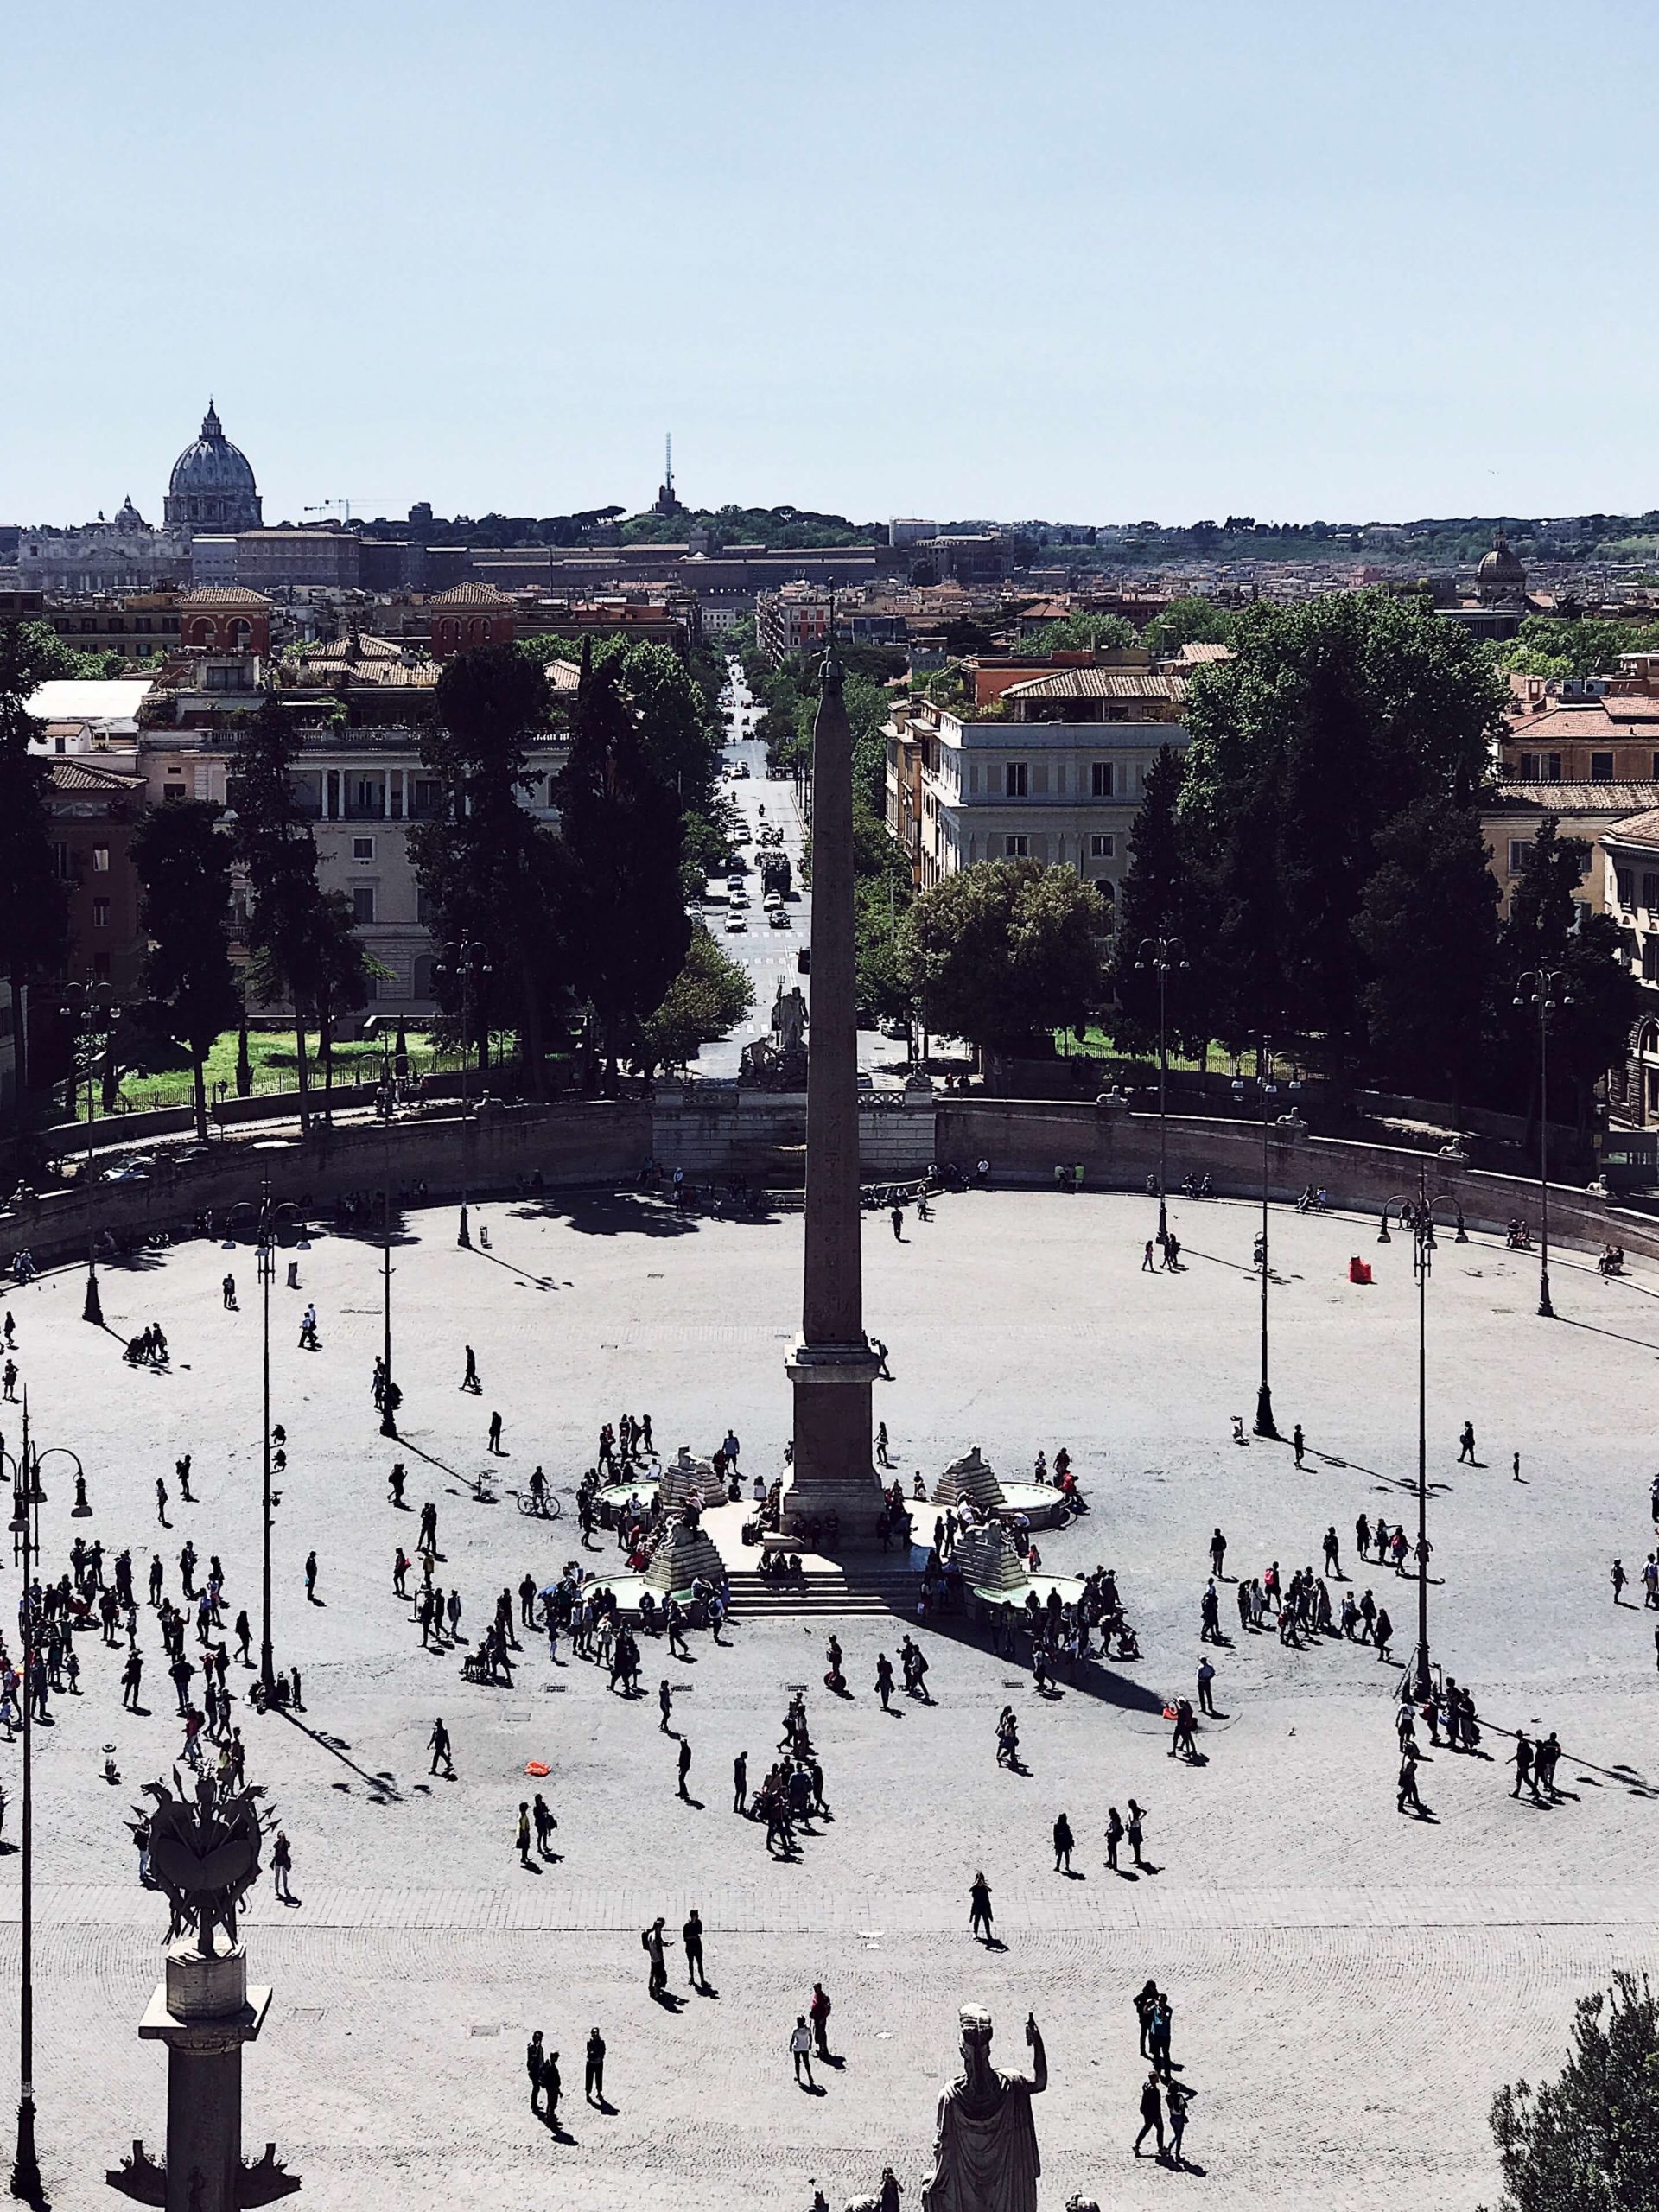 Rome in pictures: views of the city